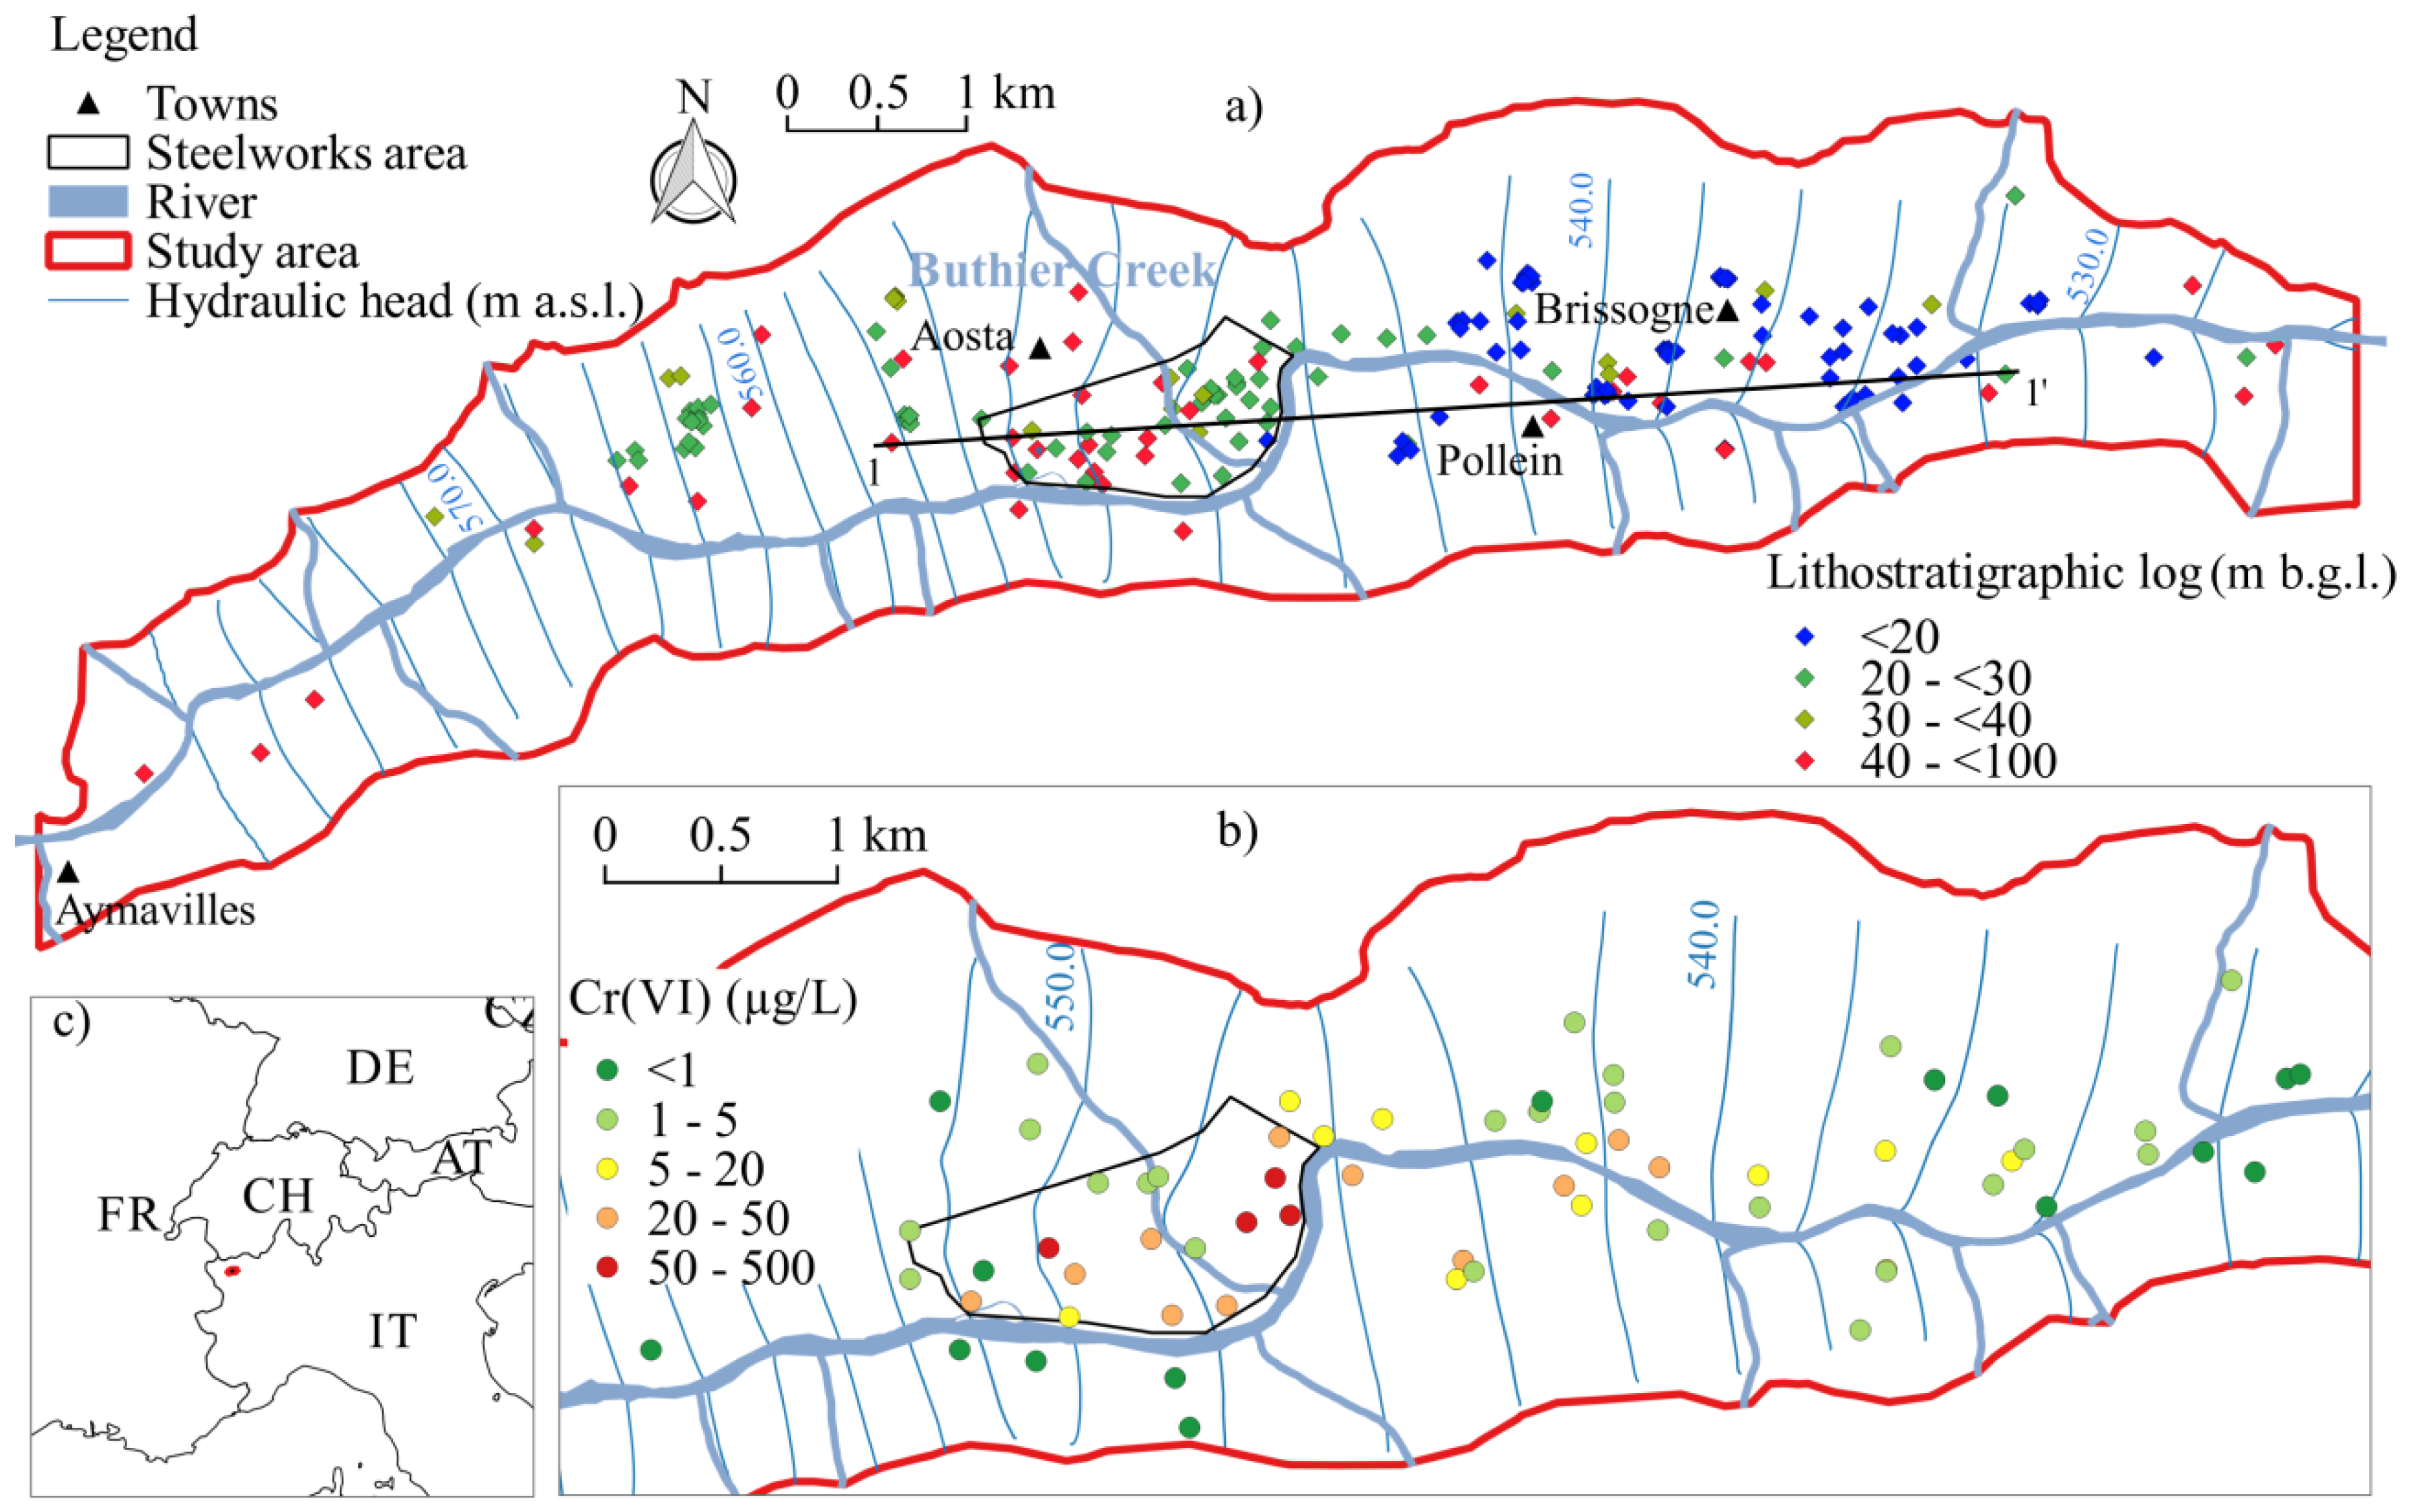 Geosciences | Free Full-Text | Numerical Modeling of Remediation Scenarios  of a Groundwater Cr(VI) Plume in an Alpine Valley Aquifer | HTML